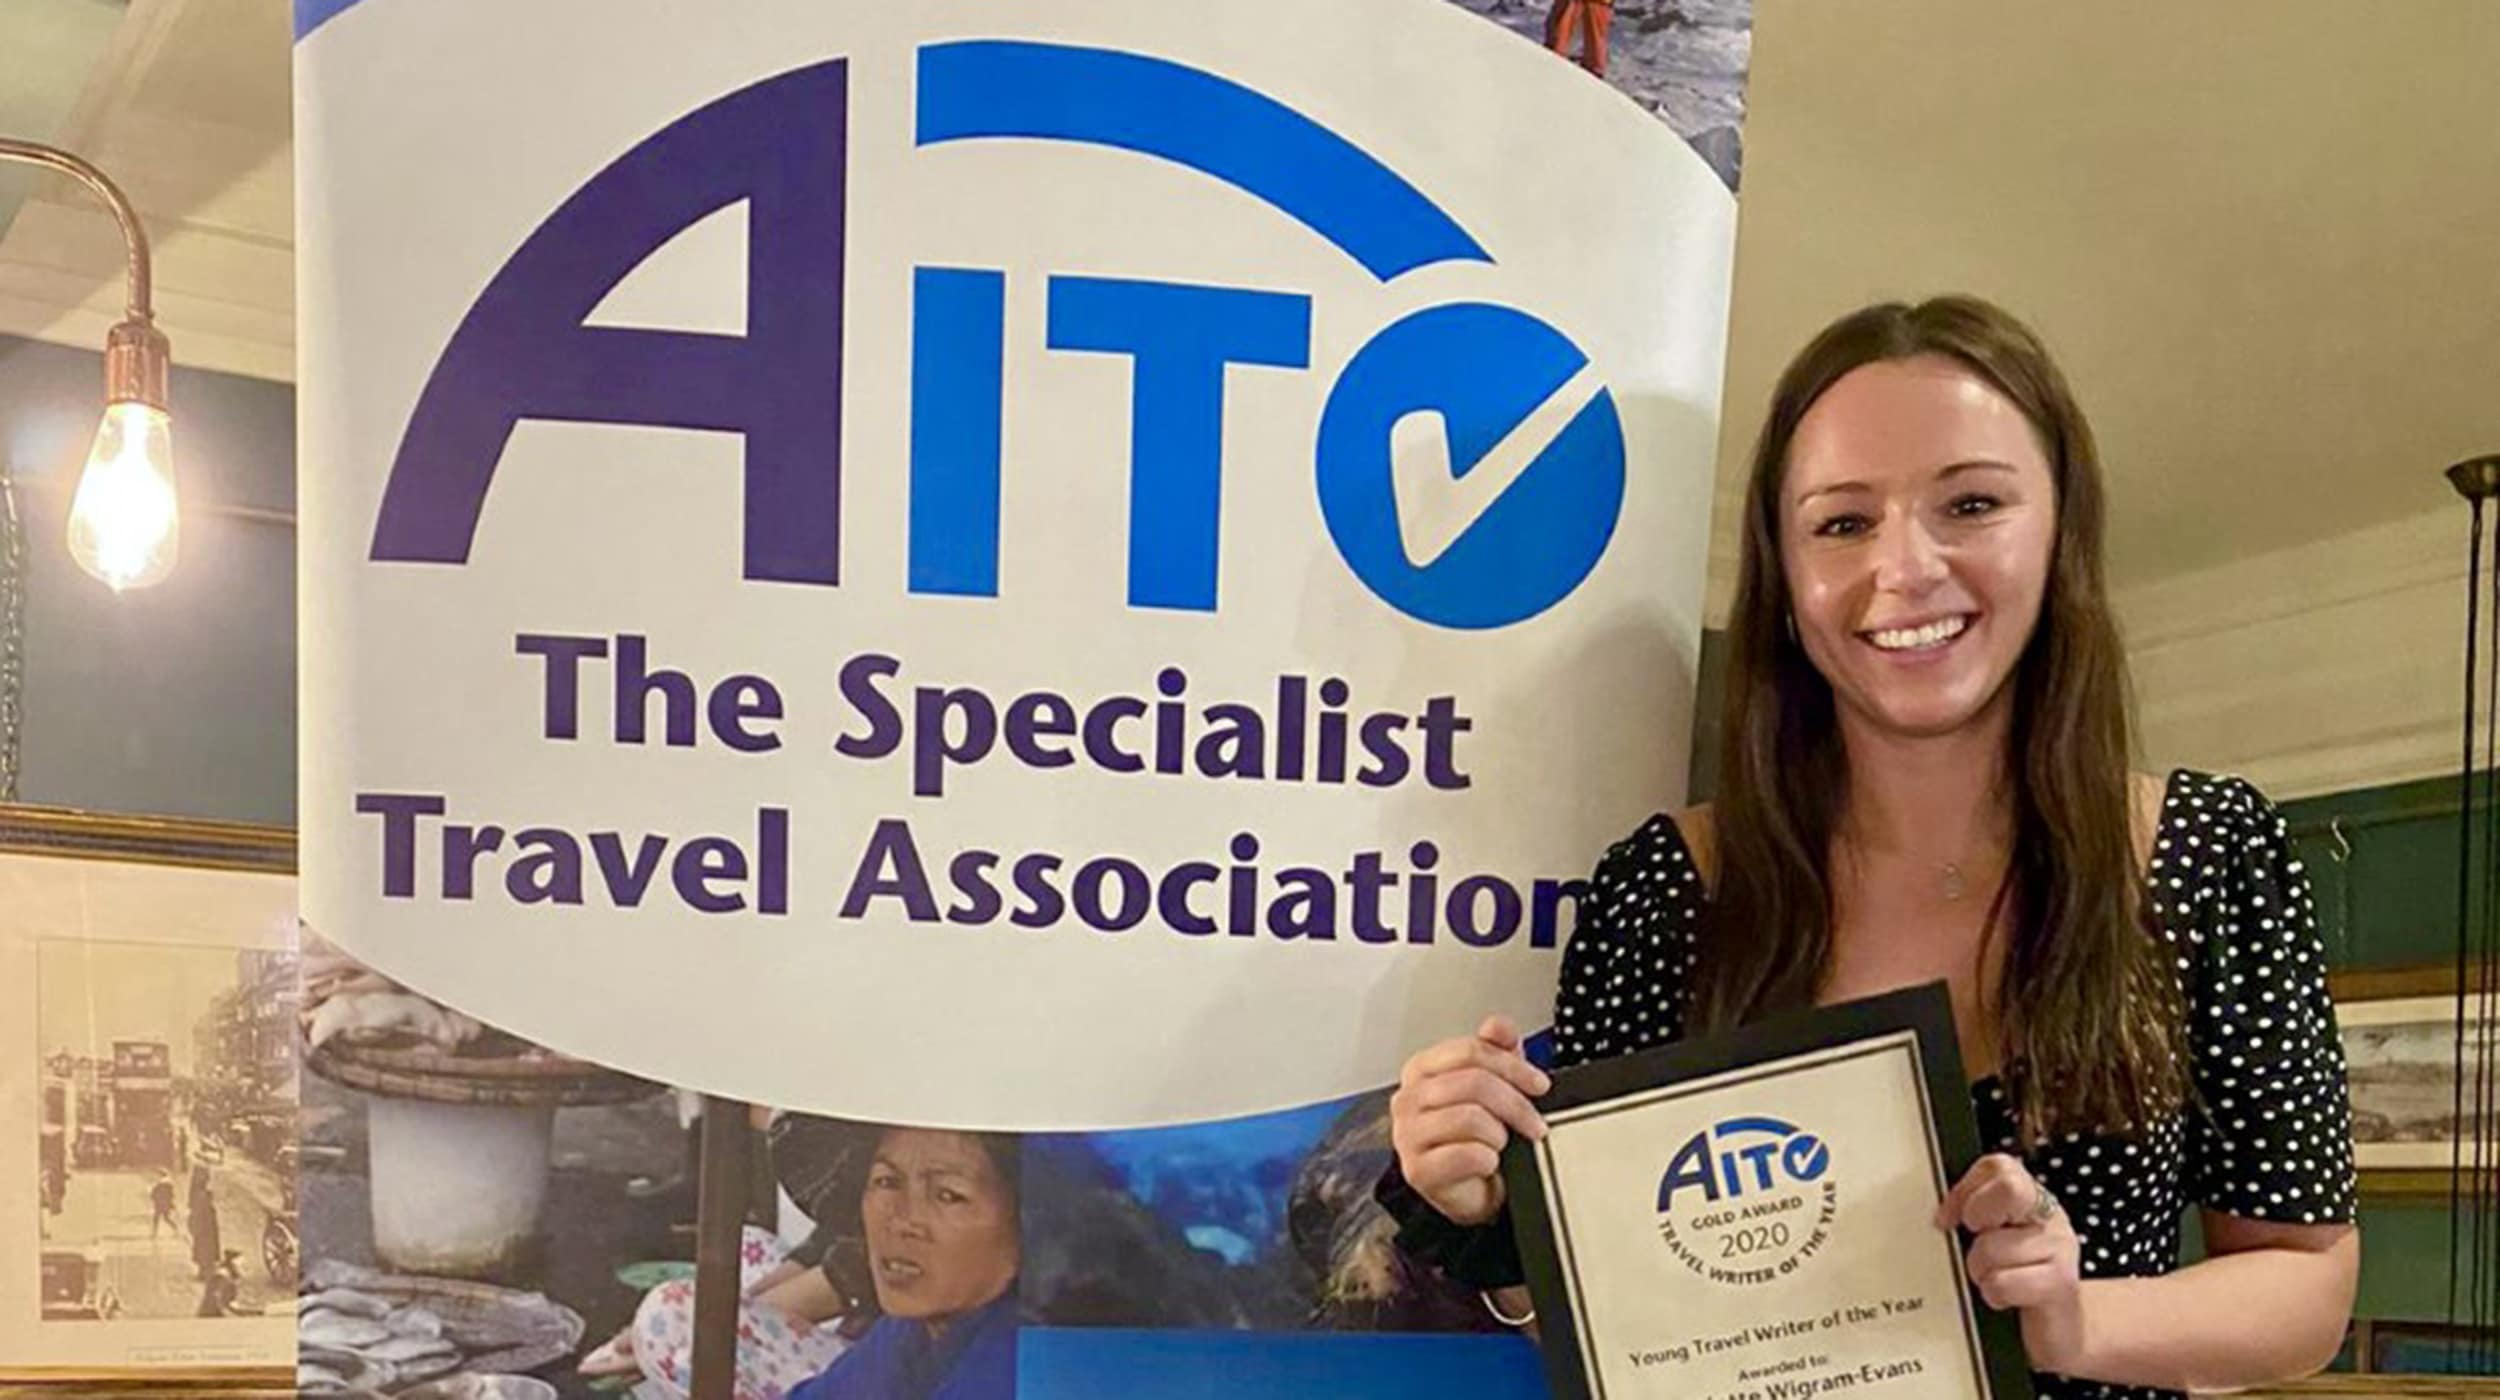 National Geographic Traveller (UK) content editor Charlotte Wigram-Evans was named Young Travel Writer of the Year at the AITO Awards.